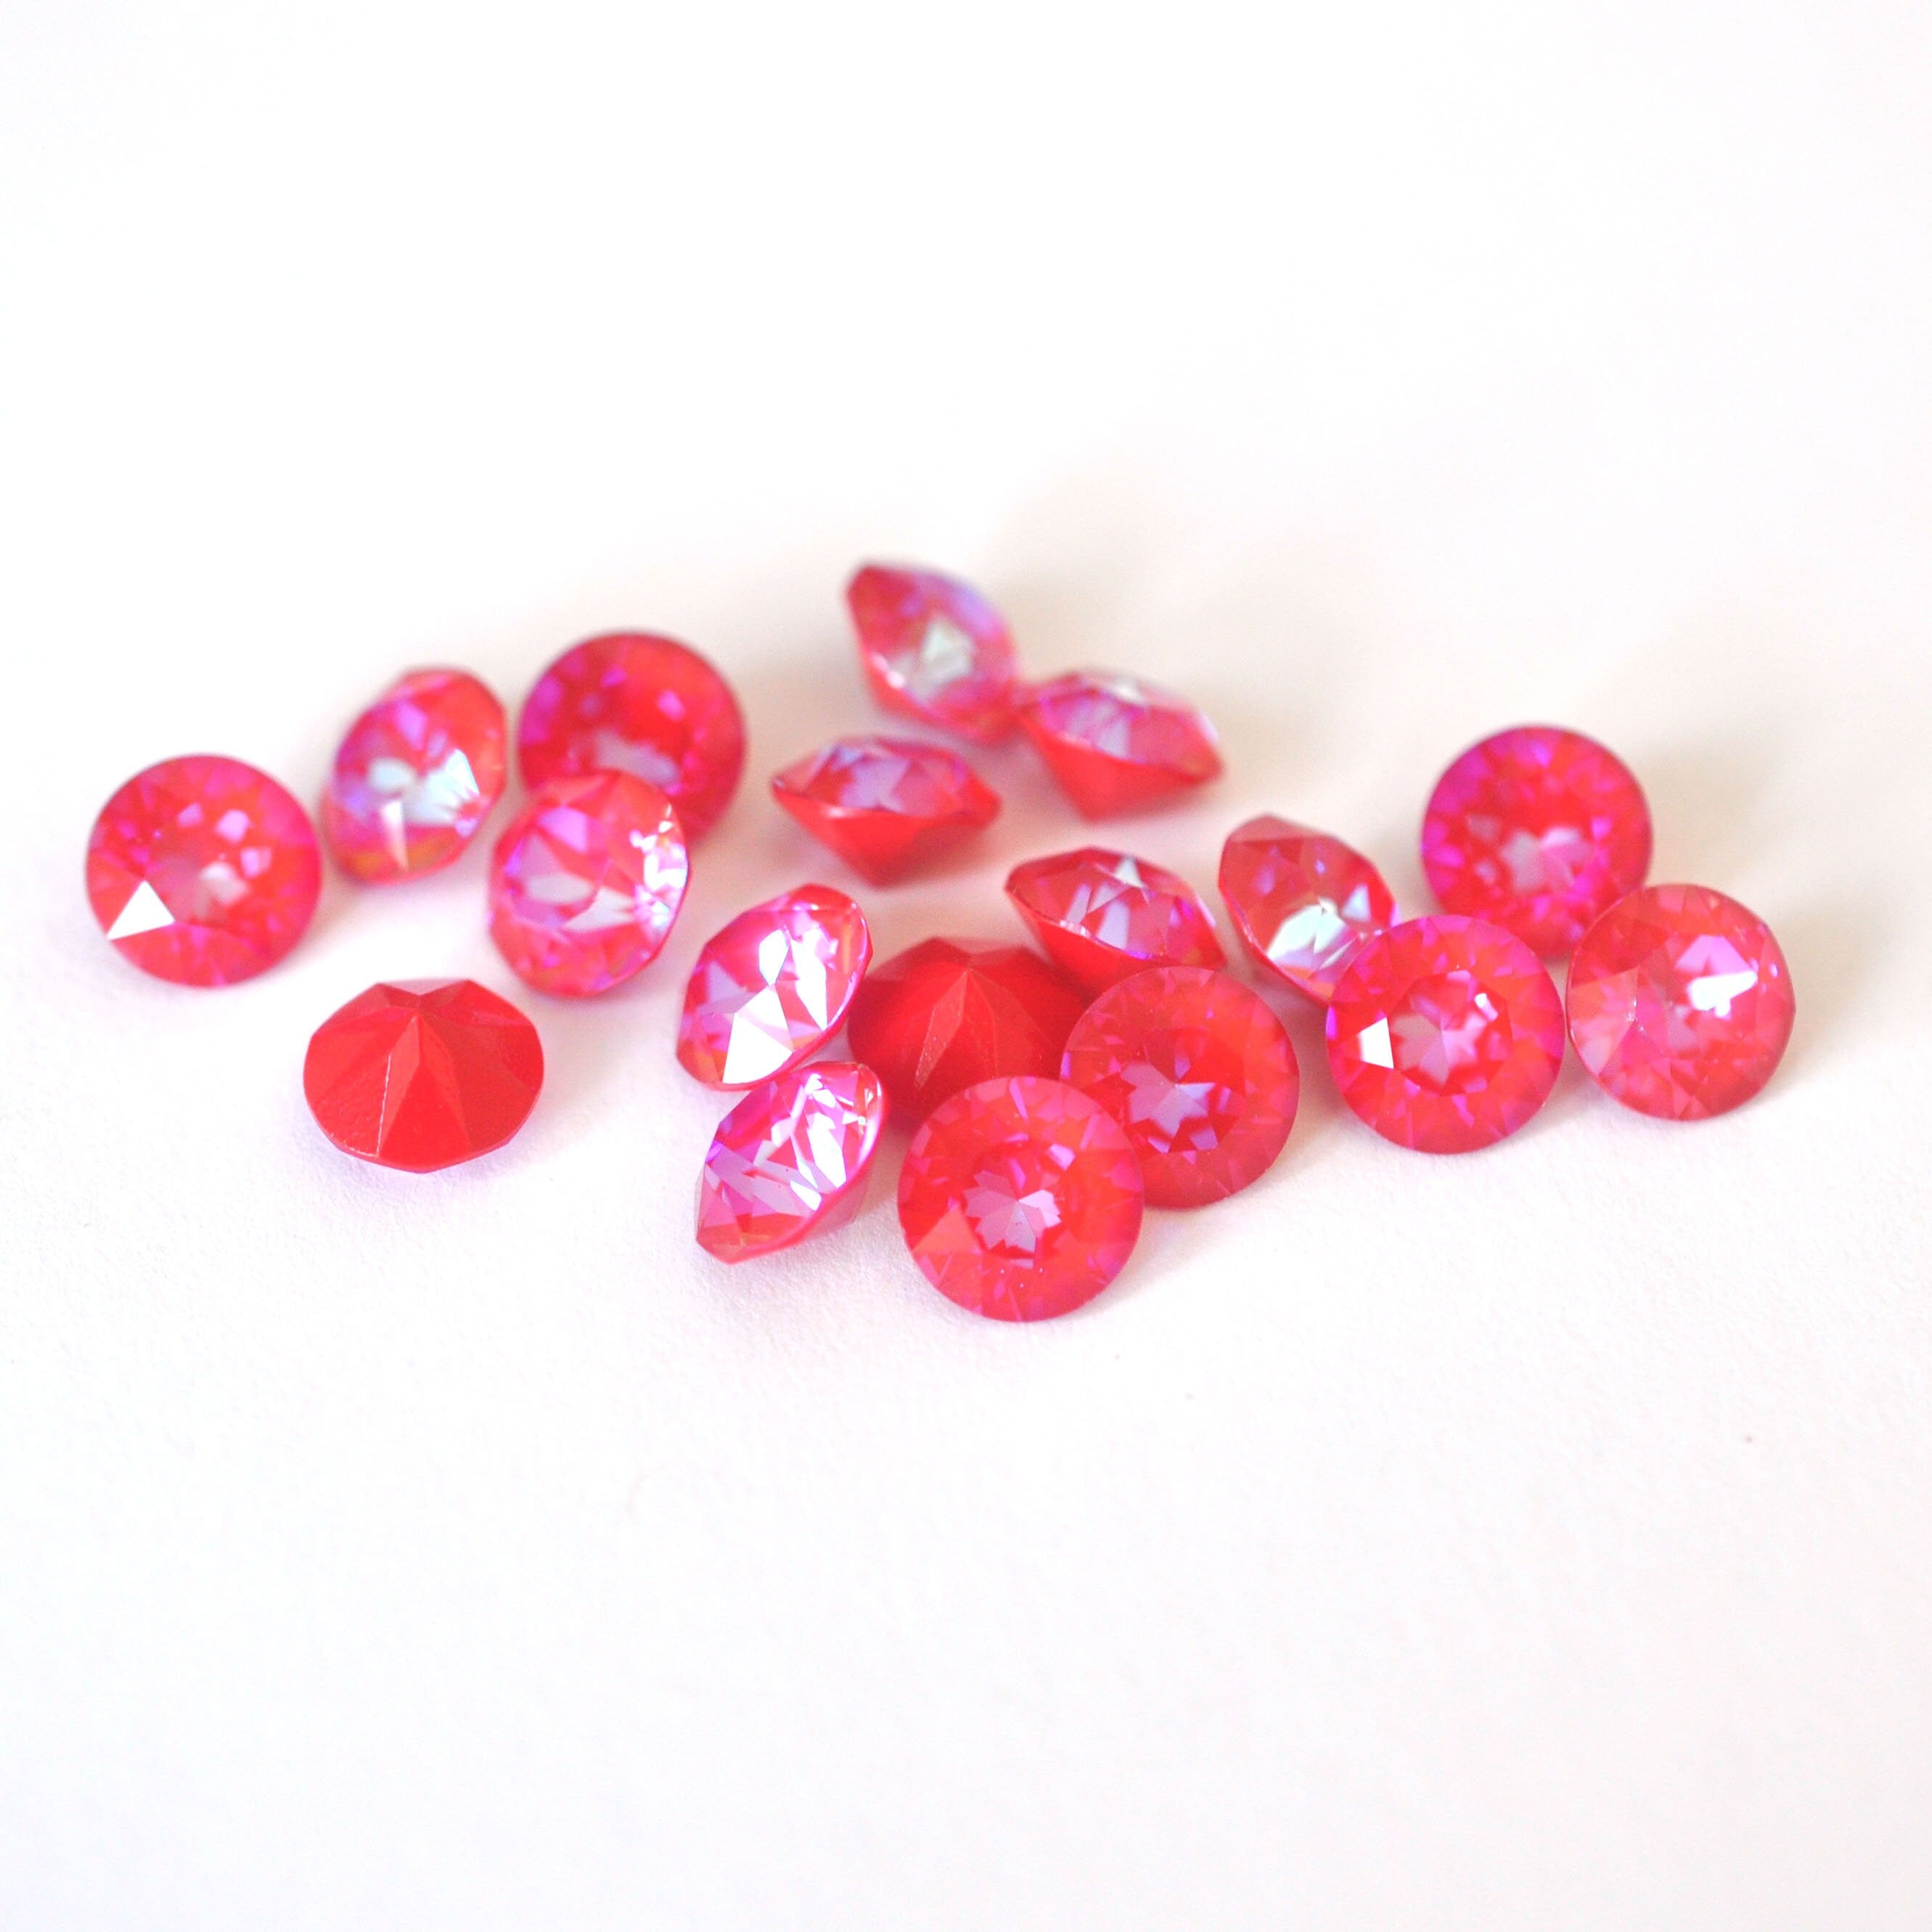 Royal Red Delite 1088 Pointed Back Chaton Barton Crystal 39ss, 8mm